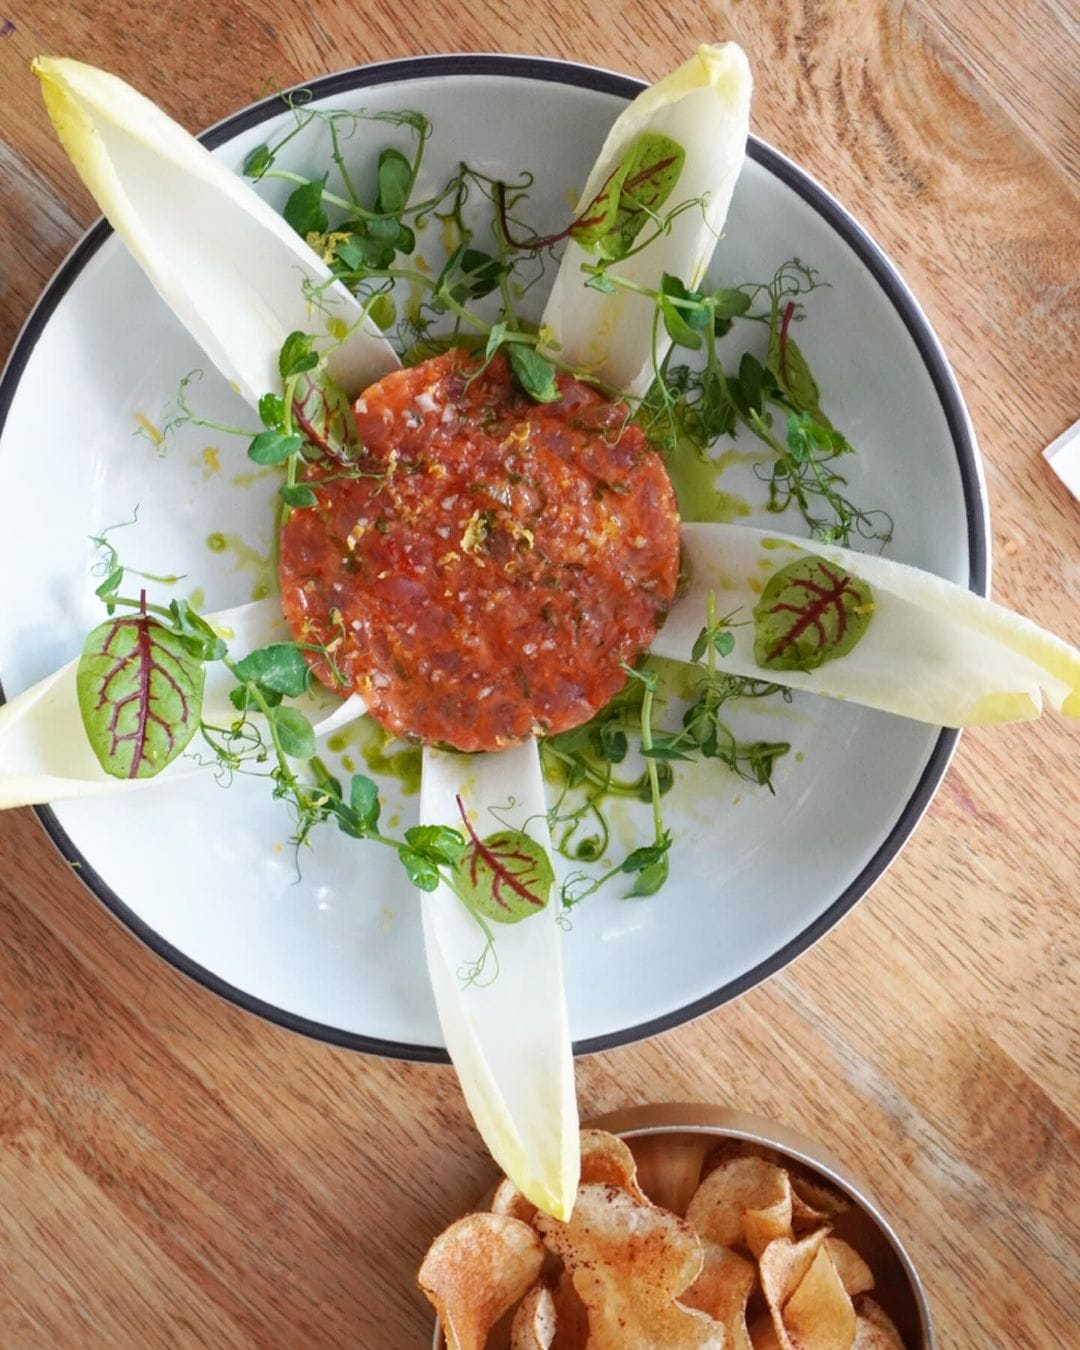 Come try our Tuna tartare before it’s gone!